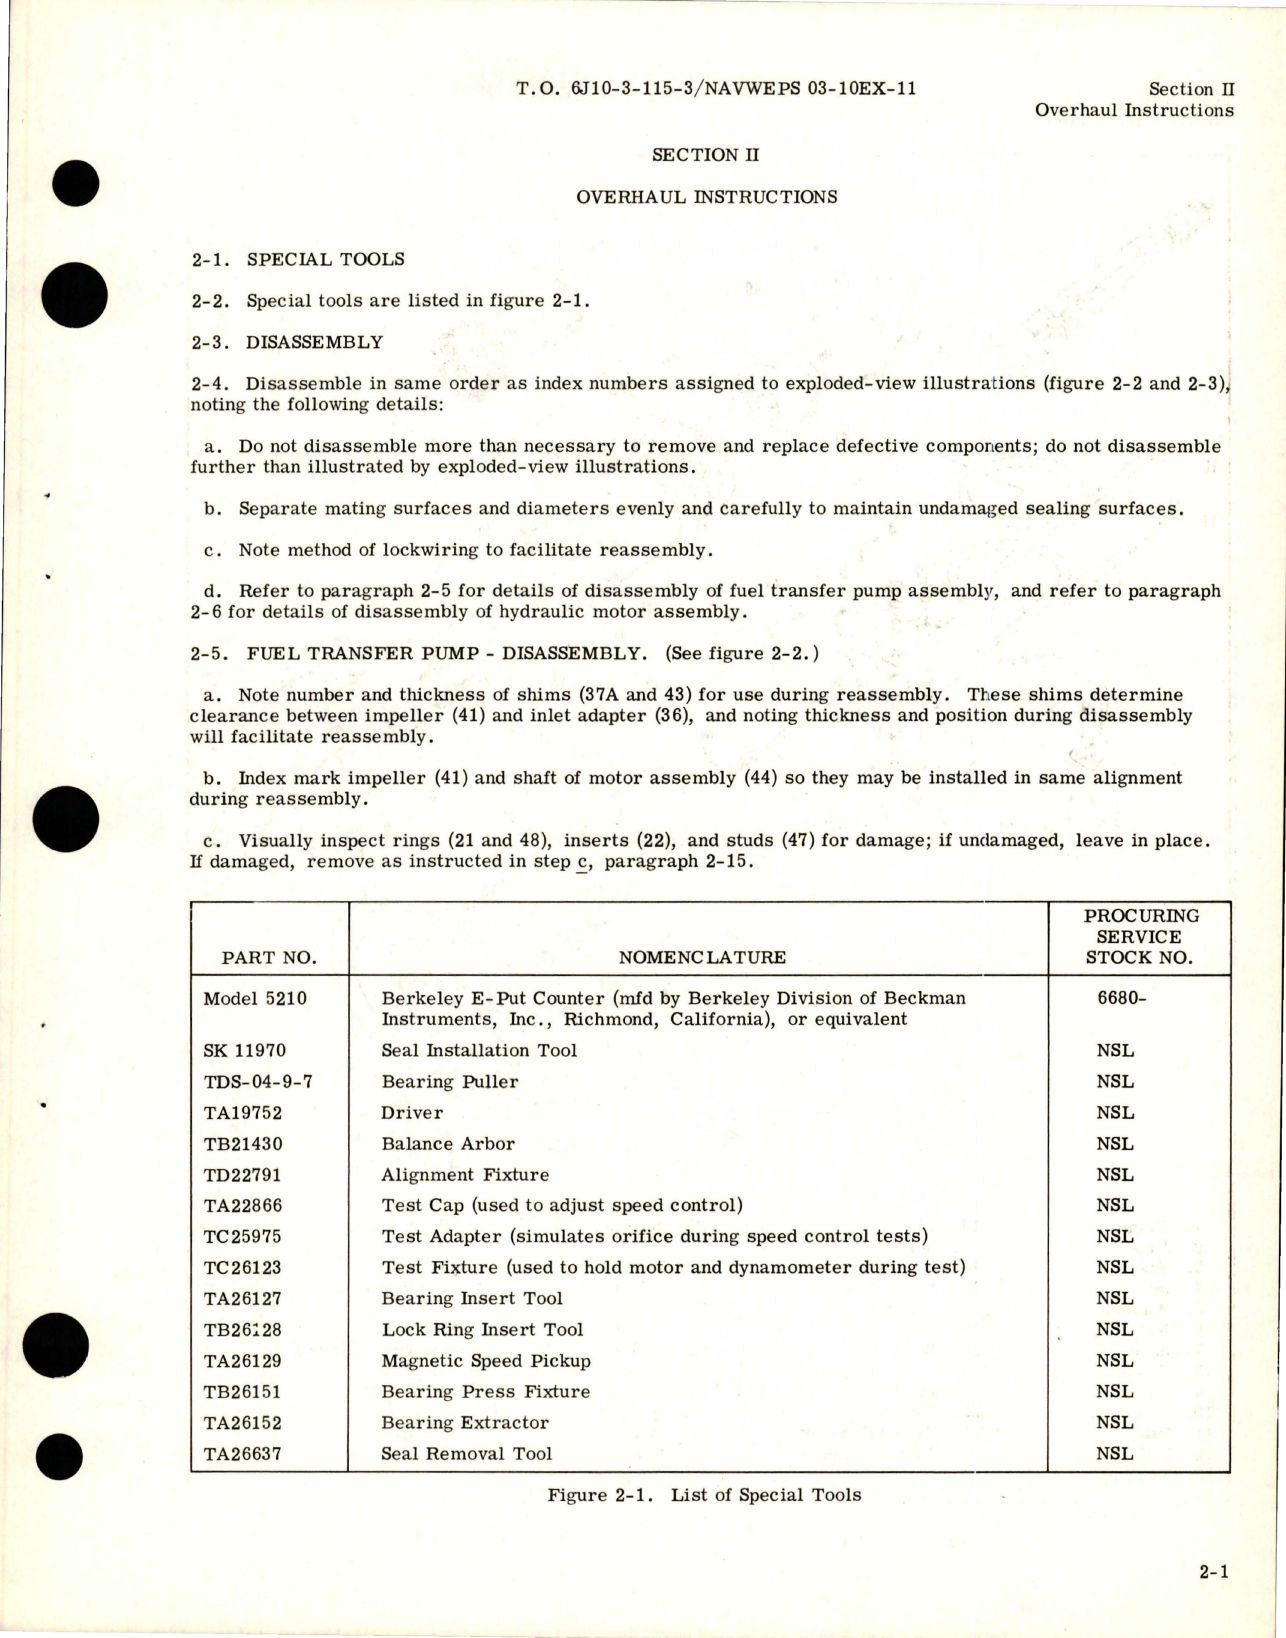 Sample page 7 from AirCorps Library document: Overhaul for Fuel Transfer Pump Assembly 